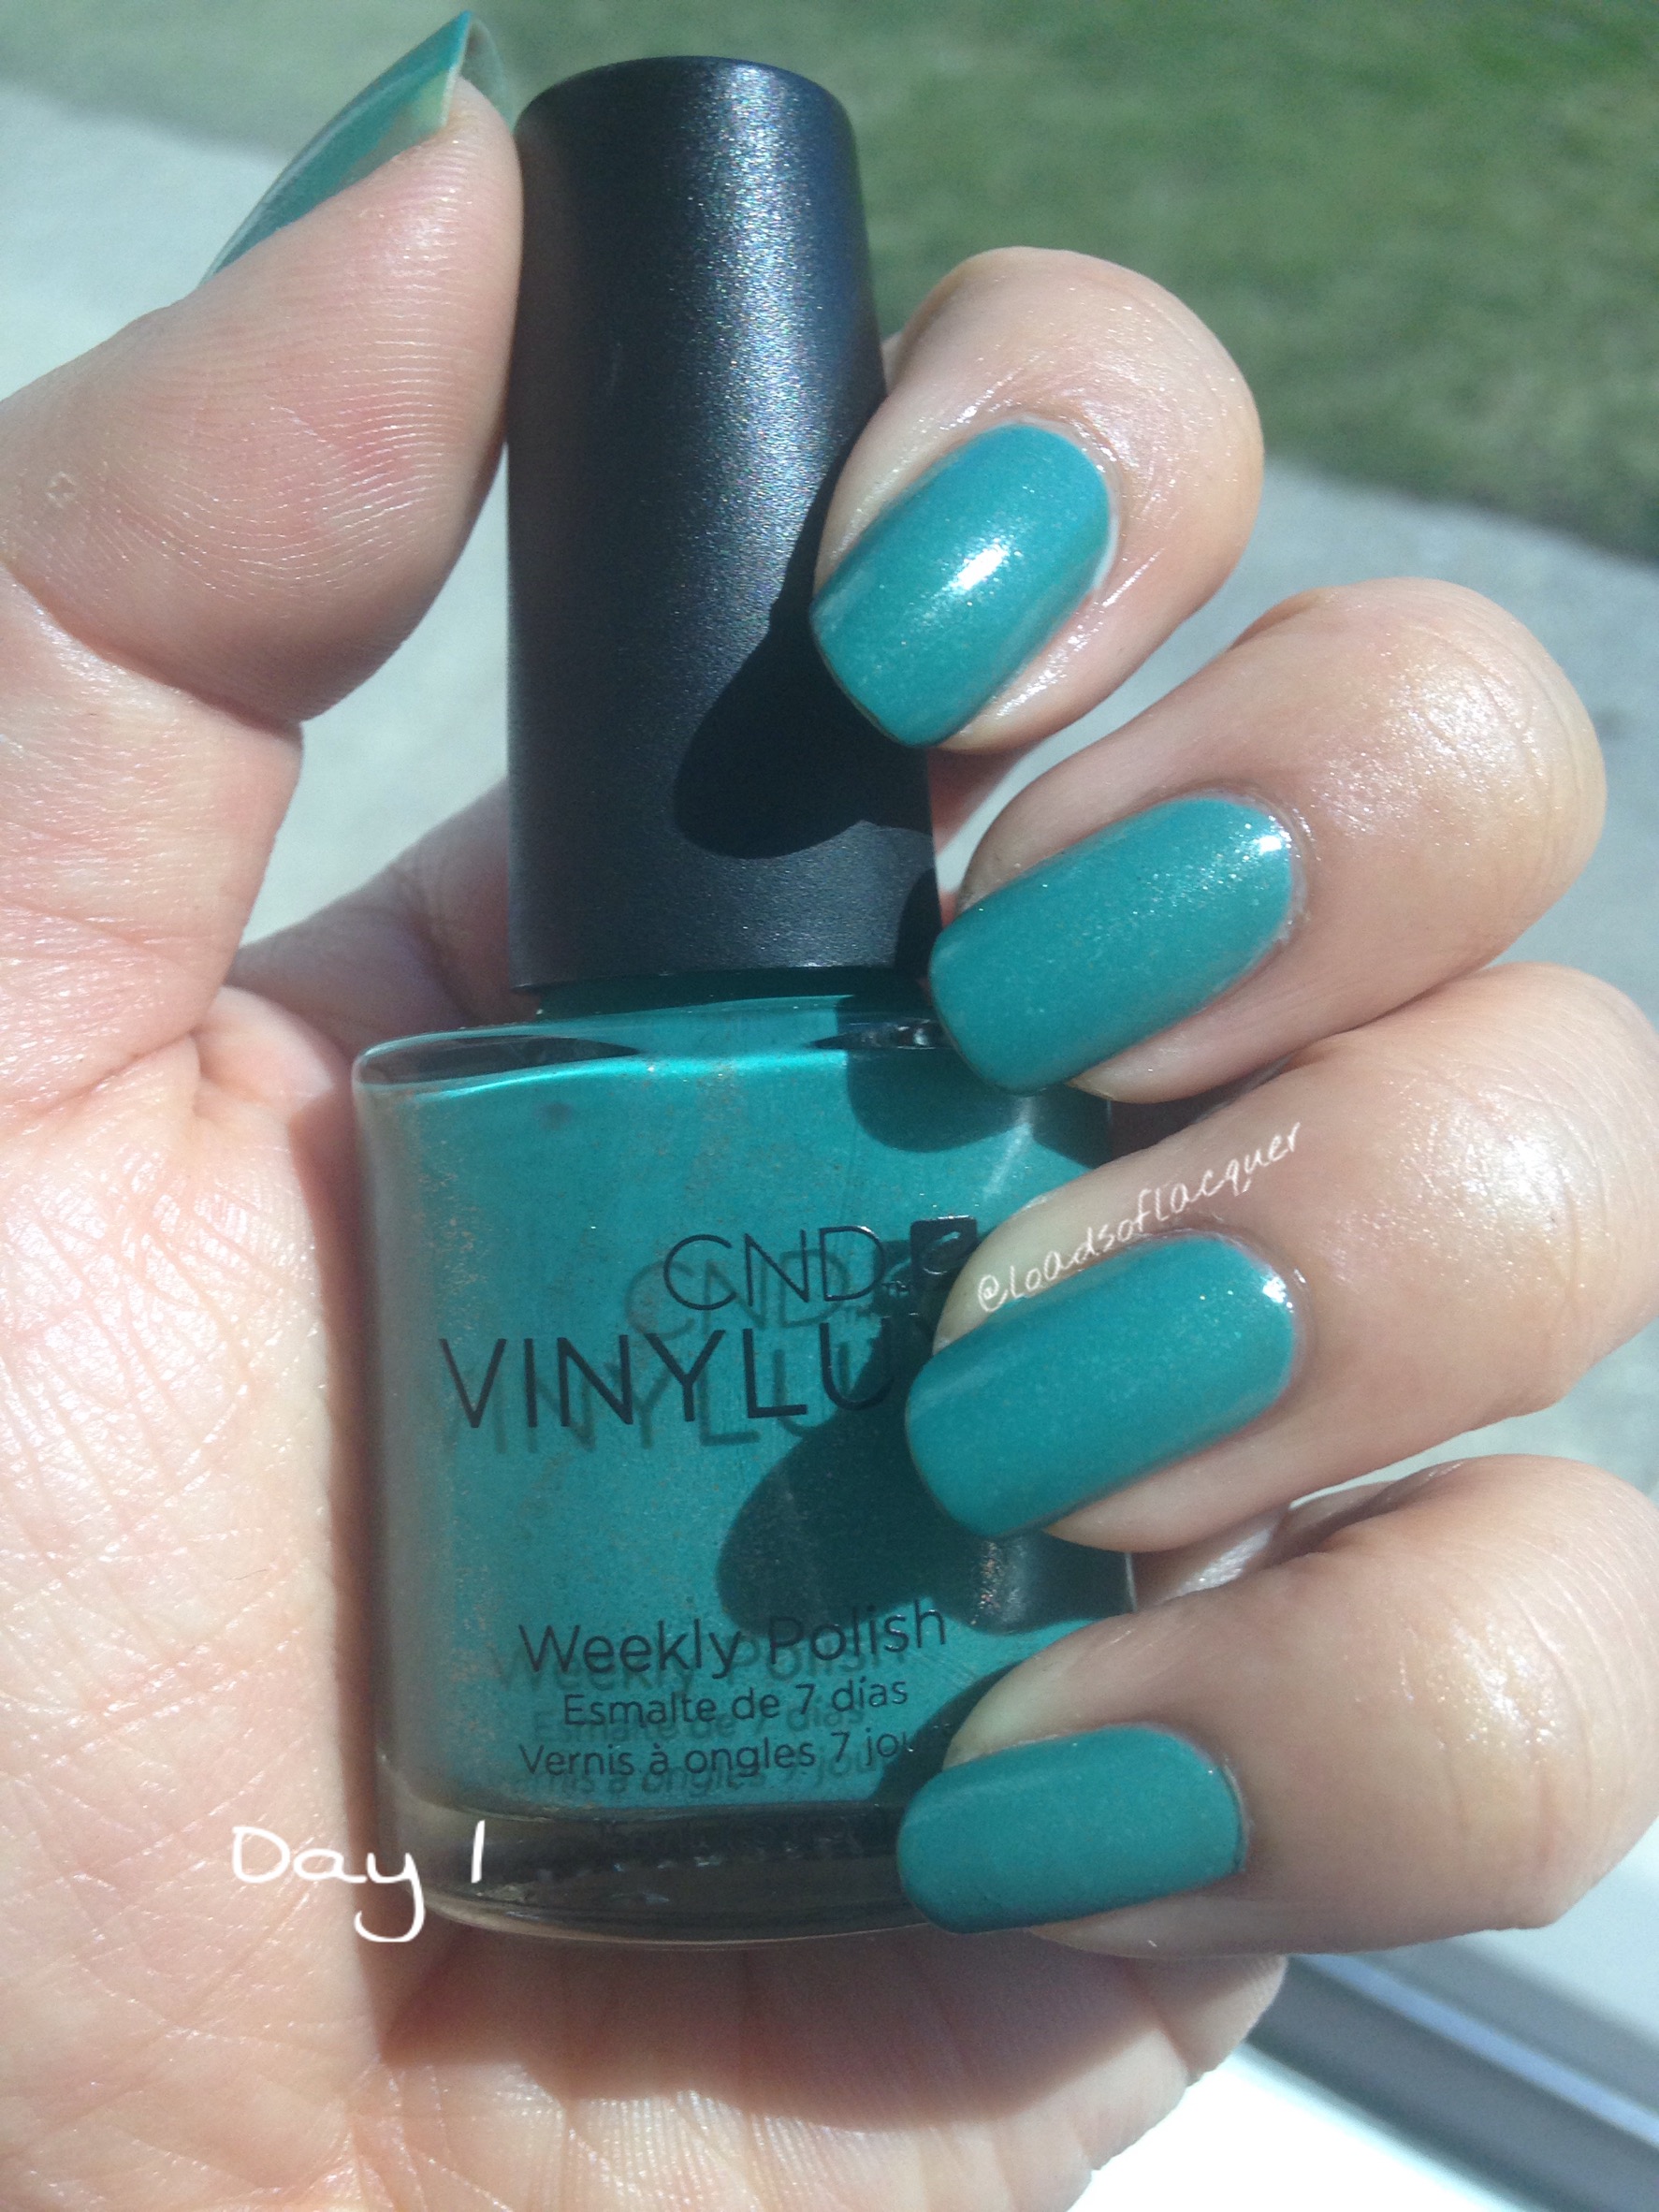 CND VINYLUX Weekly Polish and Weekly Top Coat Review — Loads of Lacquer